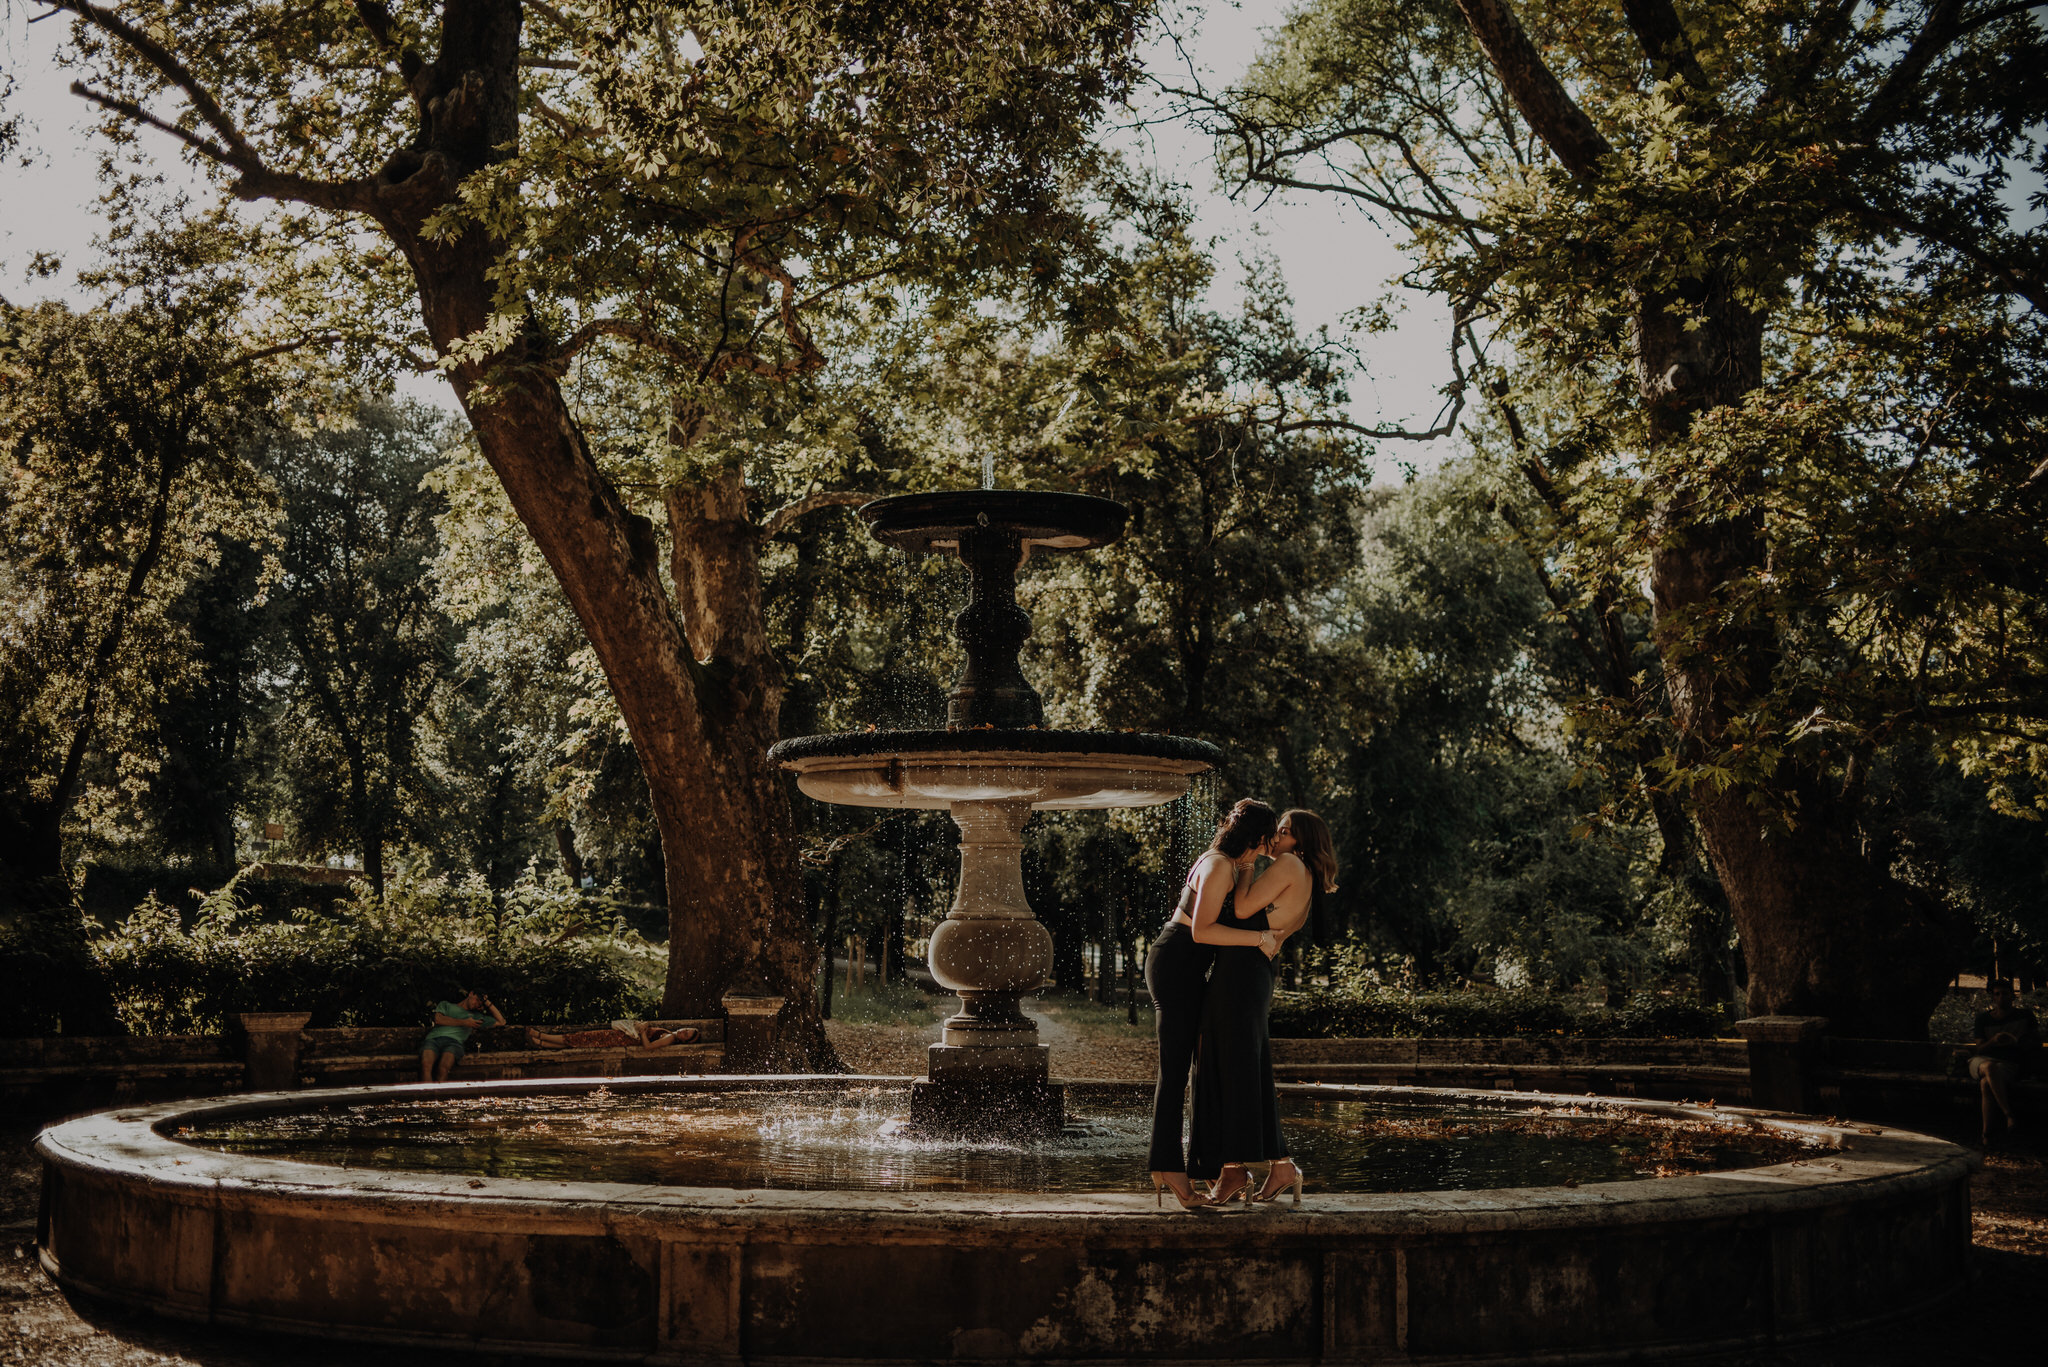 Surprise proposal and engagement celebration in the lush garden of Villa Borghese